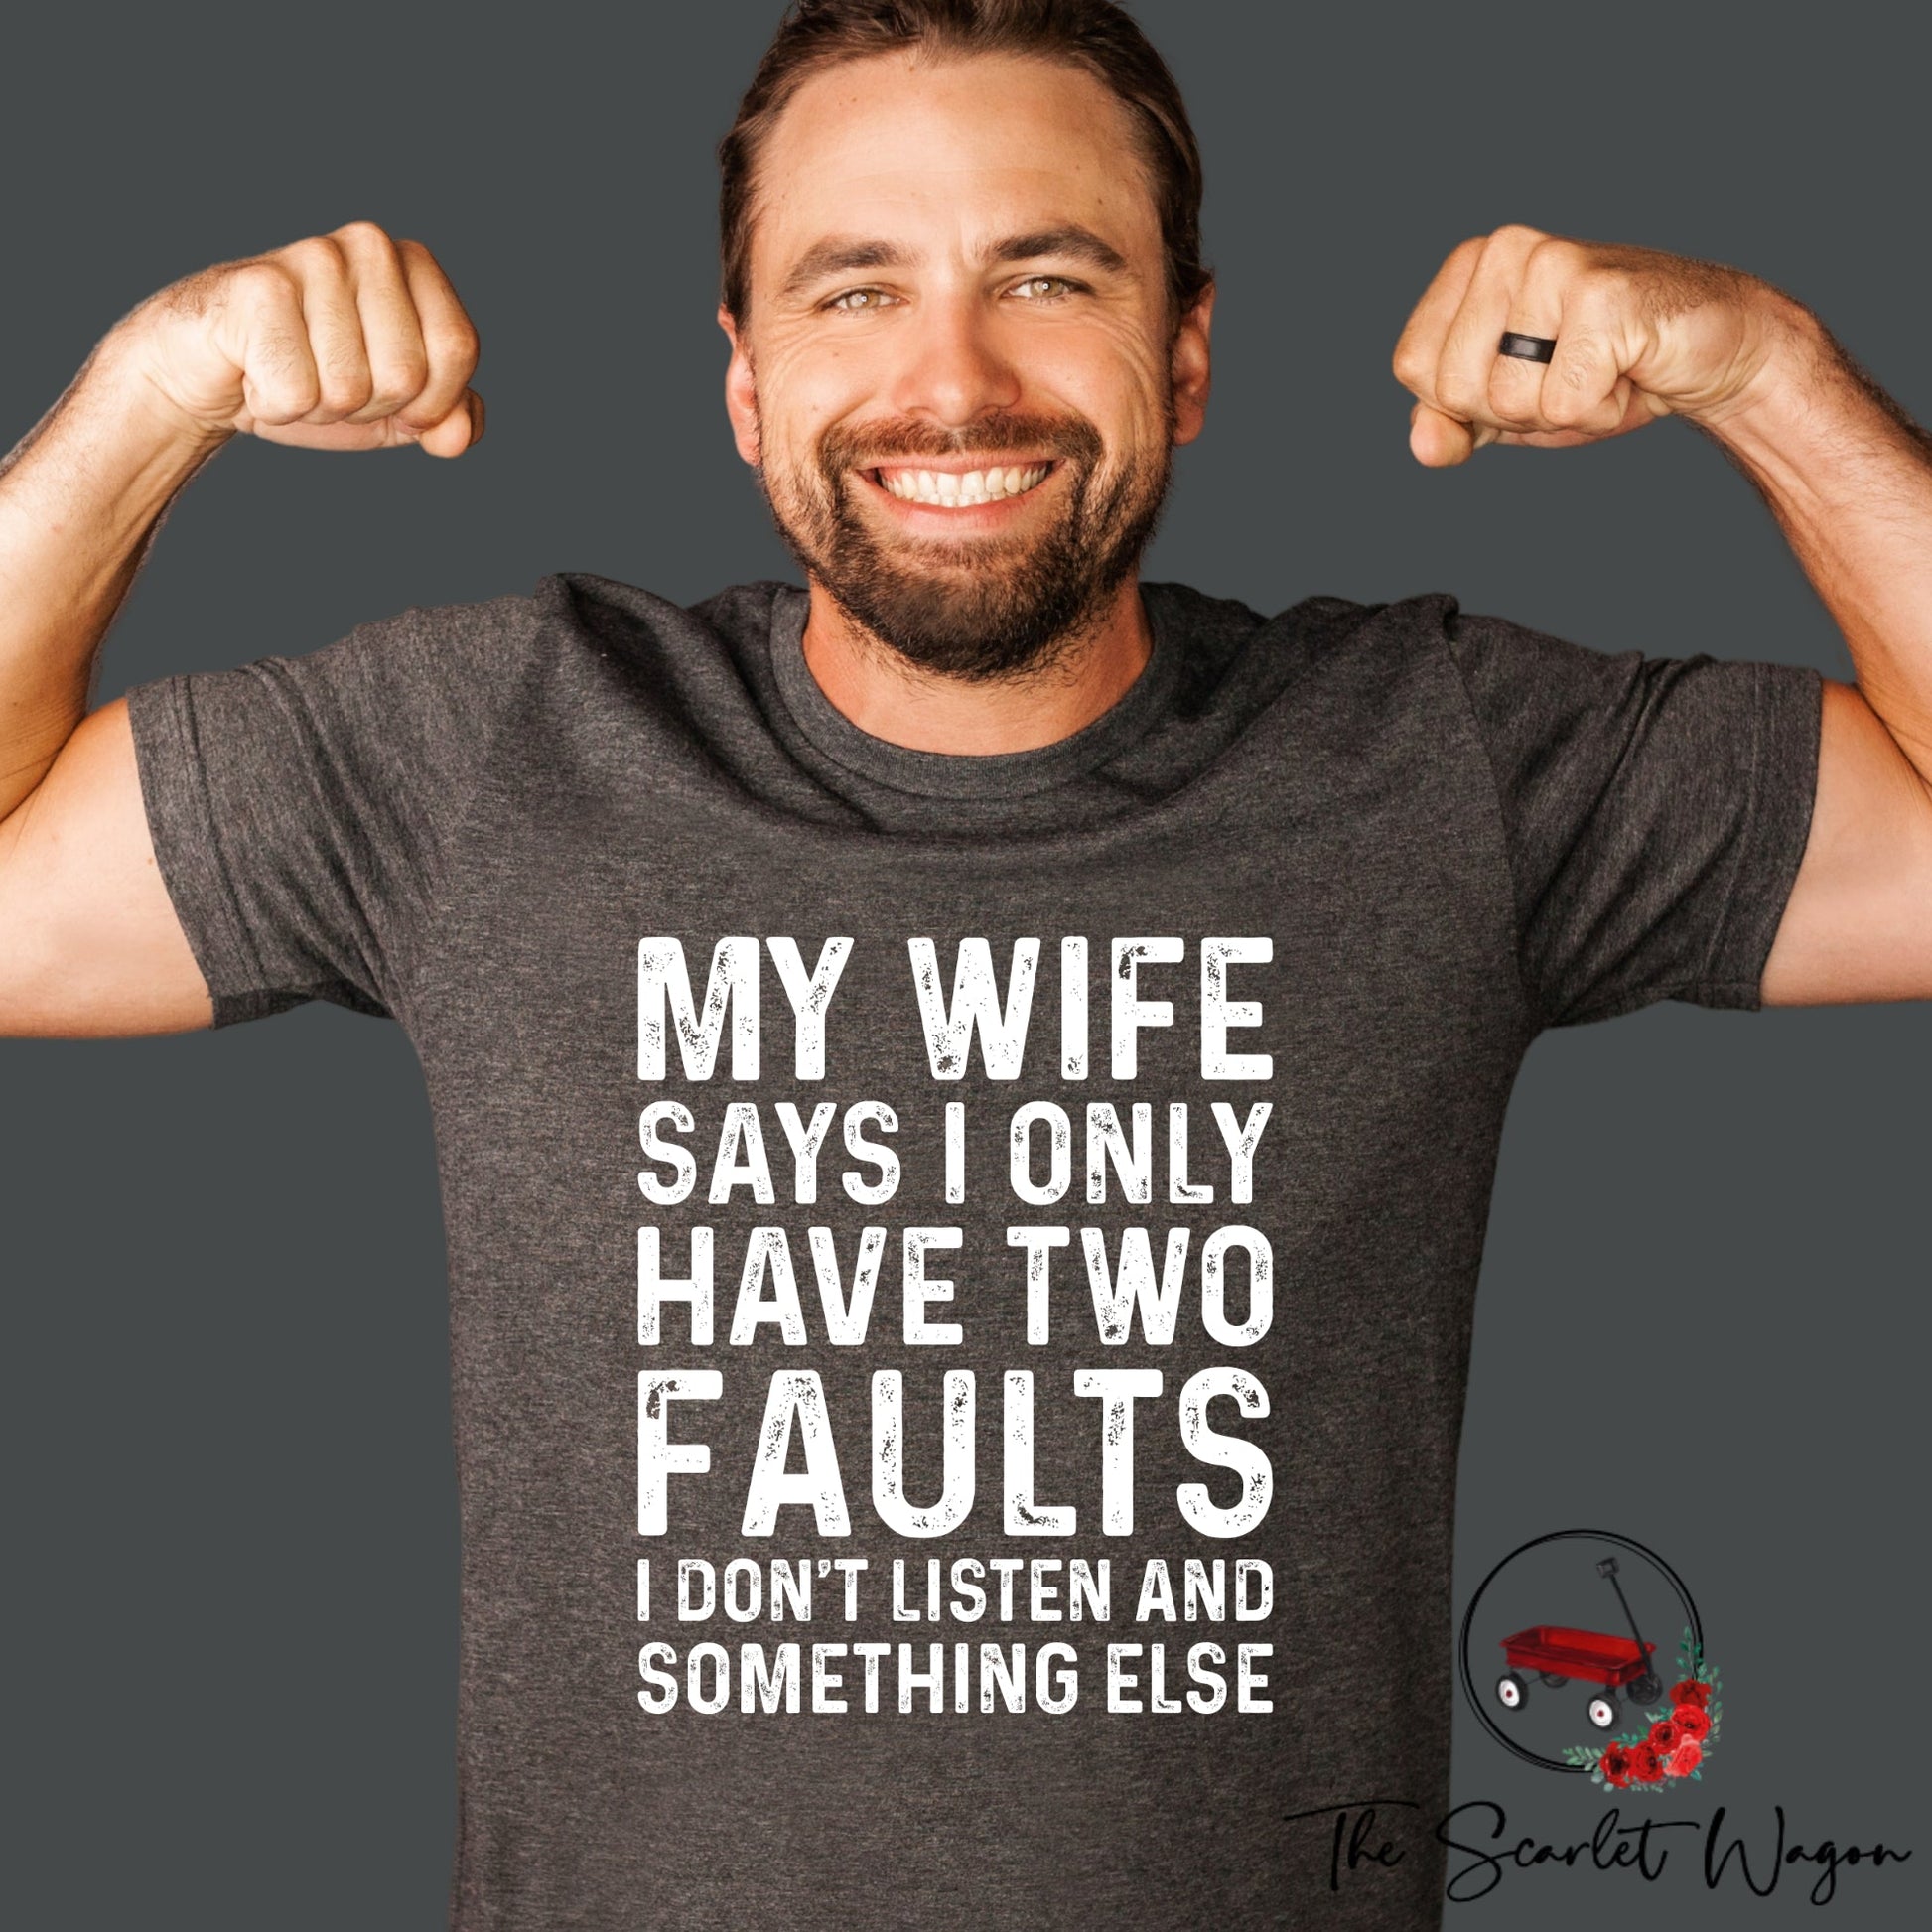 My Wife Says I Have Two Faults Premium Tee Scarlet Wagon 